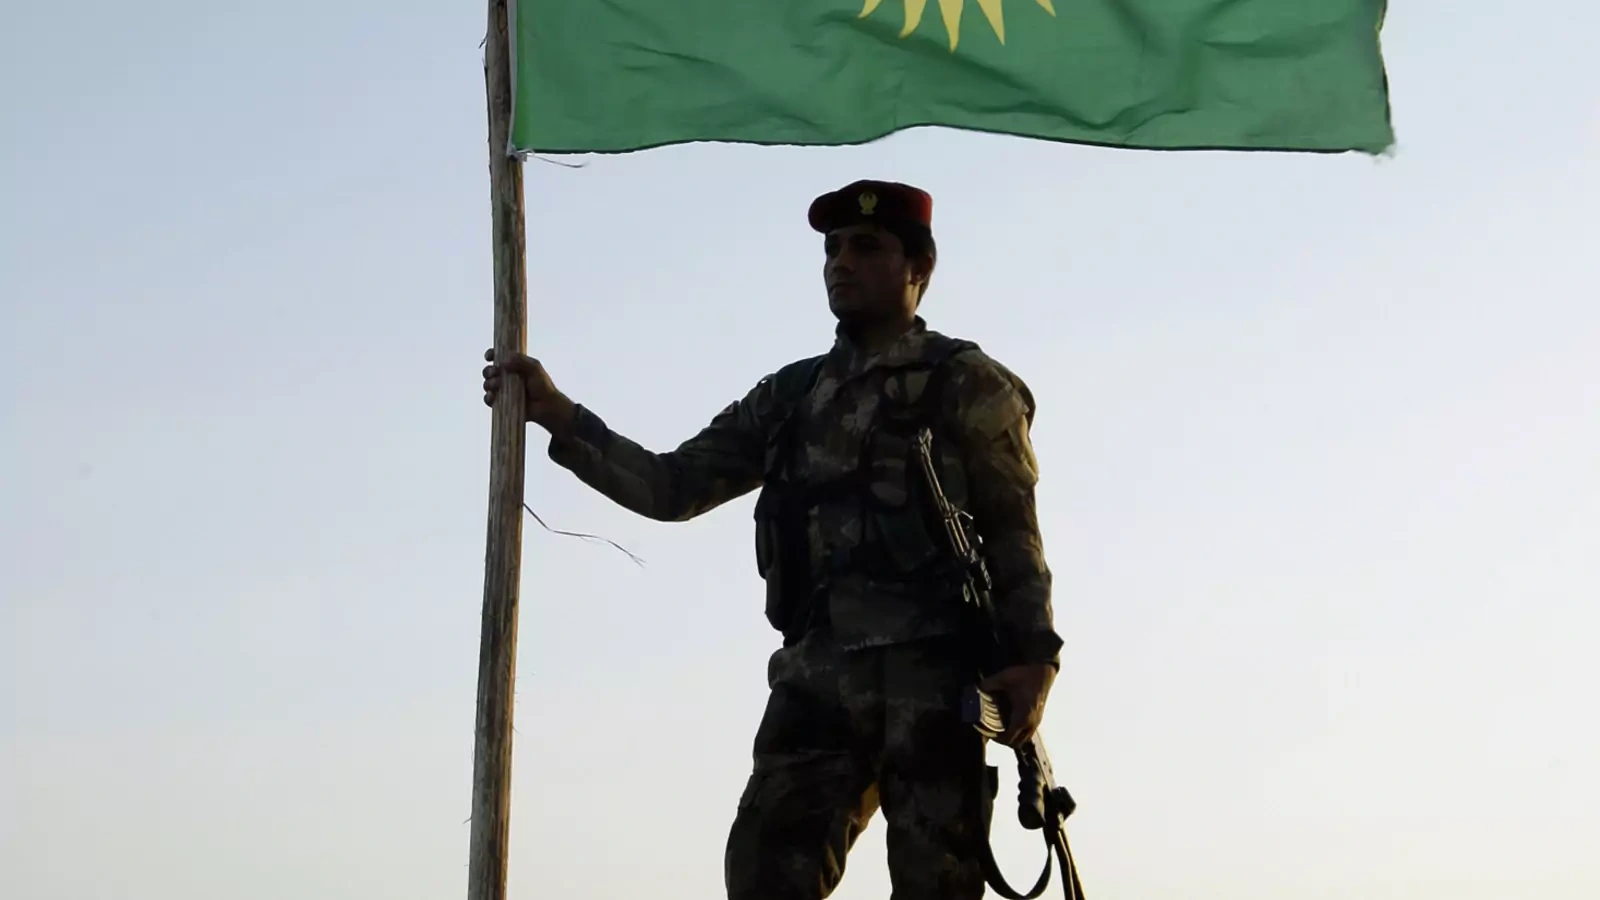 A Kurdish Peshmerga soldier holds a Kurdistan flag during a deployment in the area near the northern Iraqi border with Syria